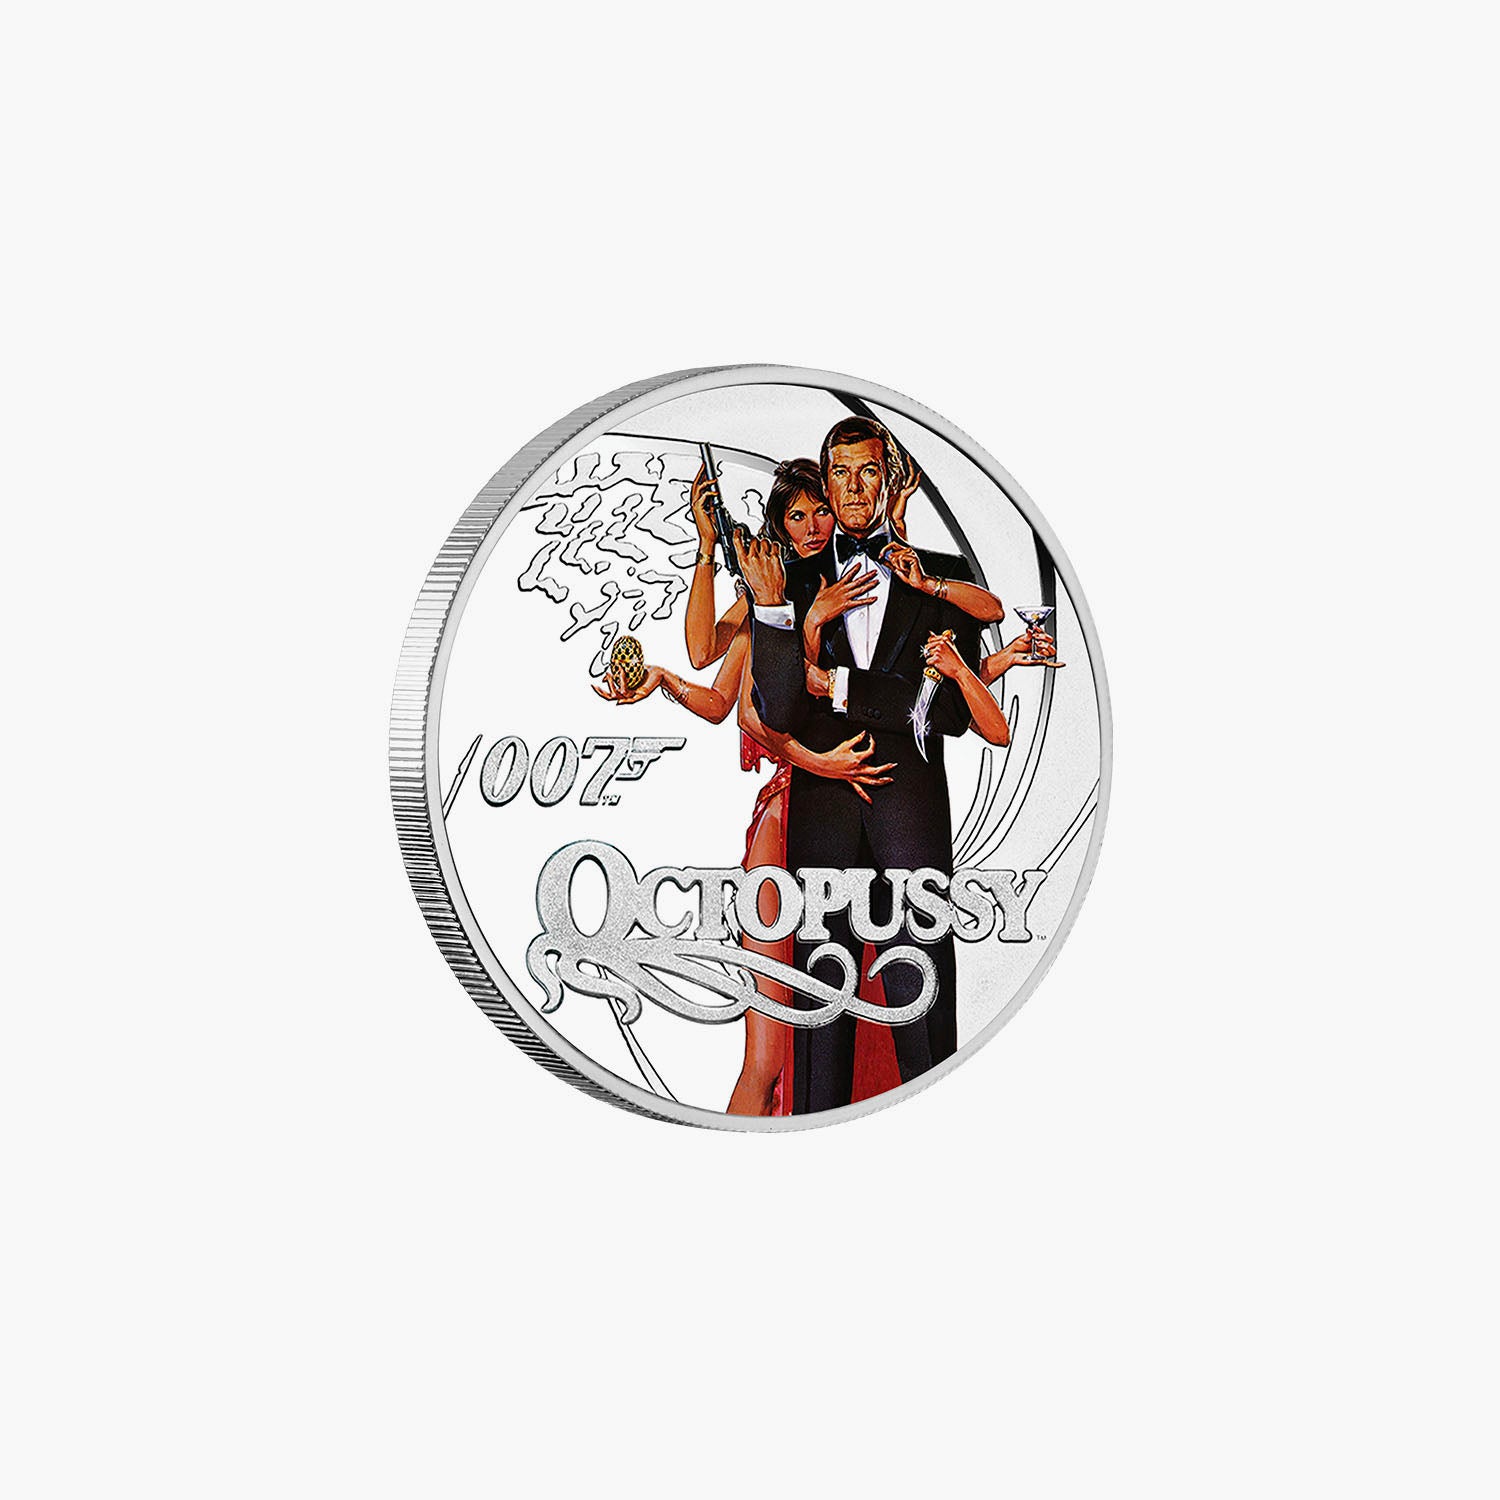 James Bond - Octopussy Solid Silver Movie Coin